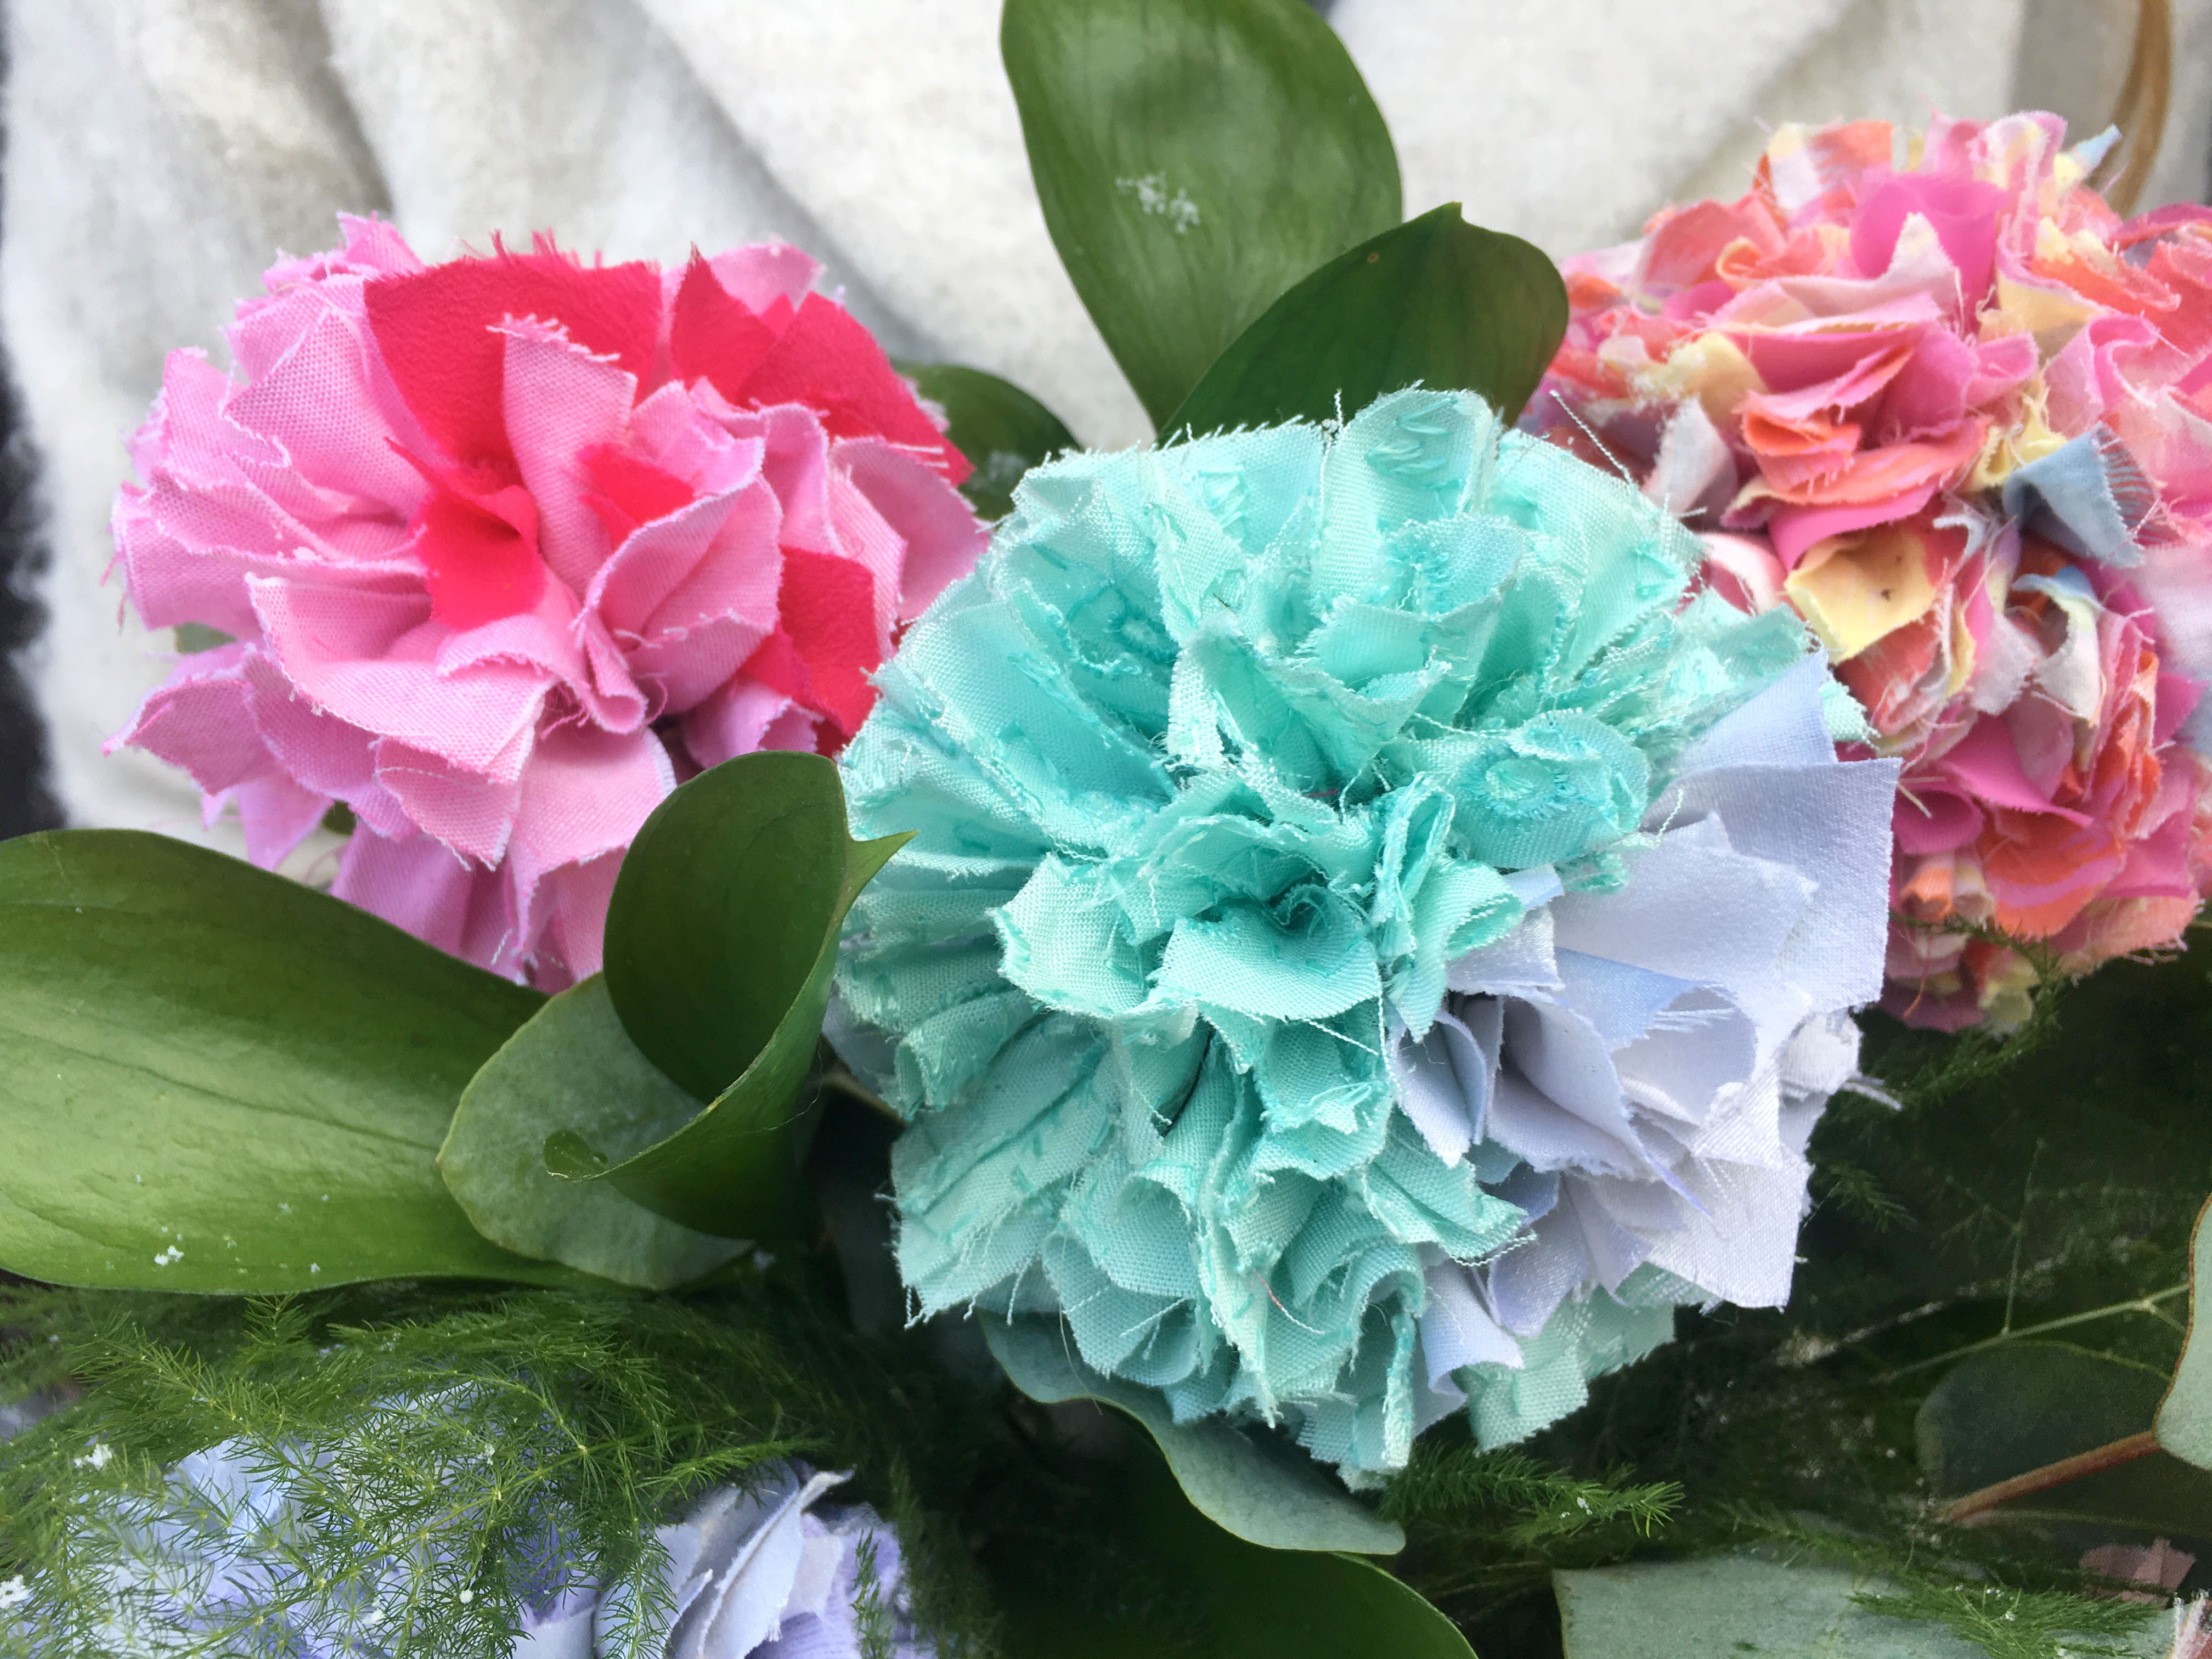 Pastel Rag Rug Flowers with green foliage easy craft project